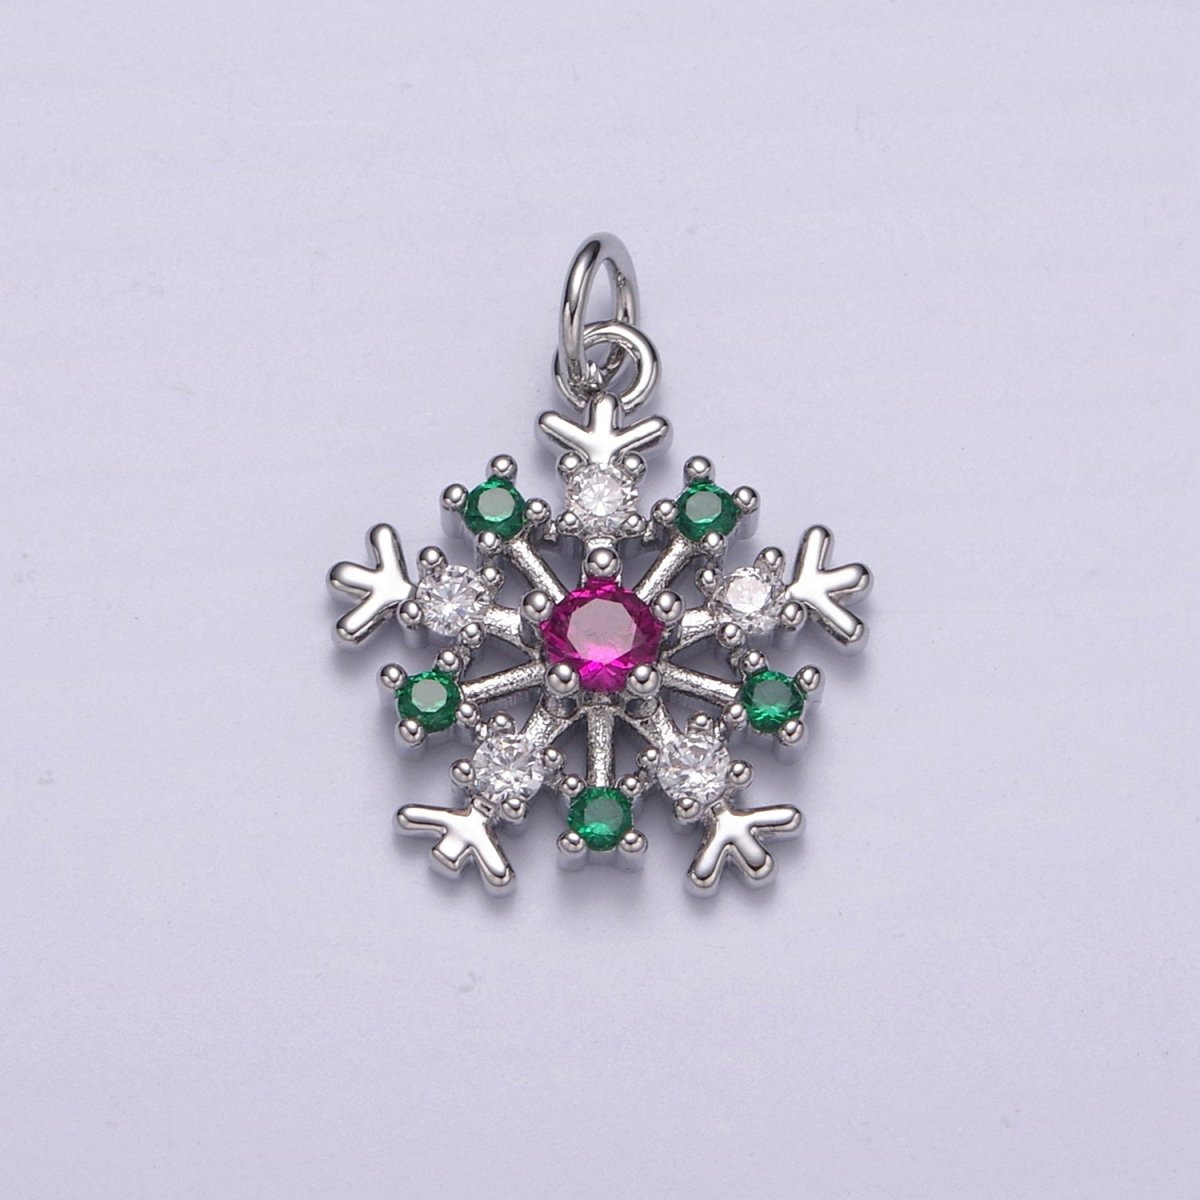 22.6x16.7mm Gold Filled Snowflake Pendant, Silver Charms , Micro Pave Snowflake , Cz Jewelry, Cubic Zirconia Winter Snow CharmC-304 C-305 - DLUXCA